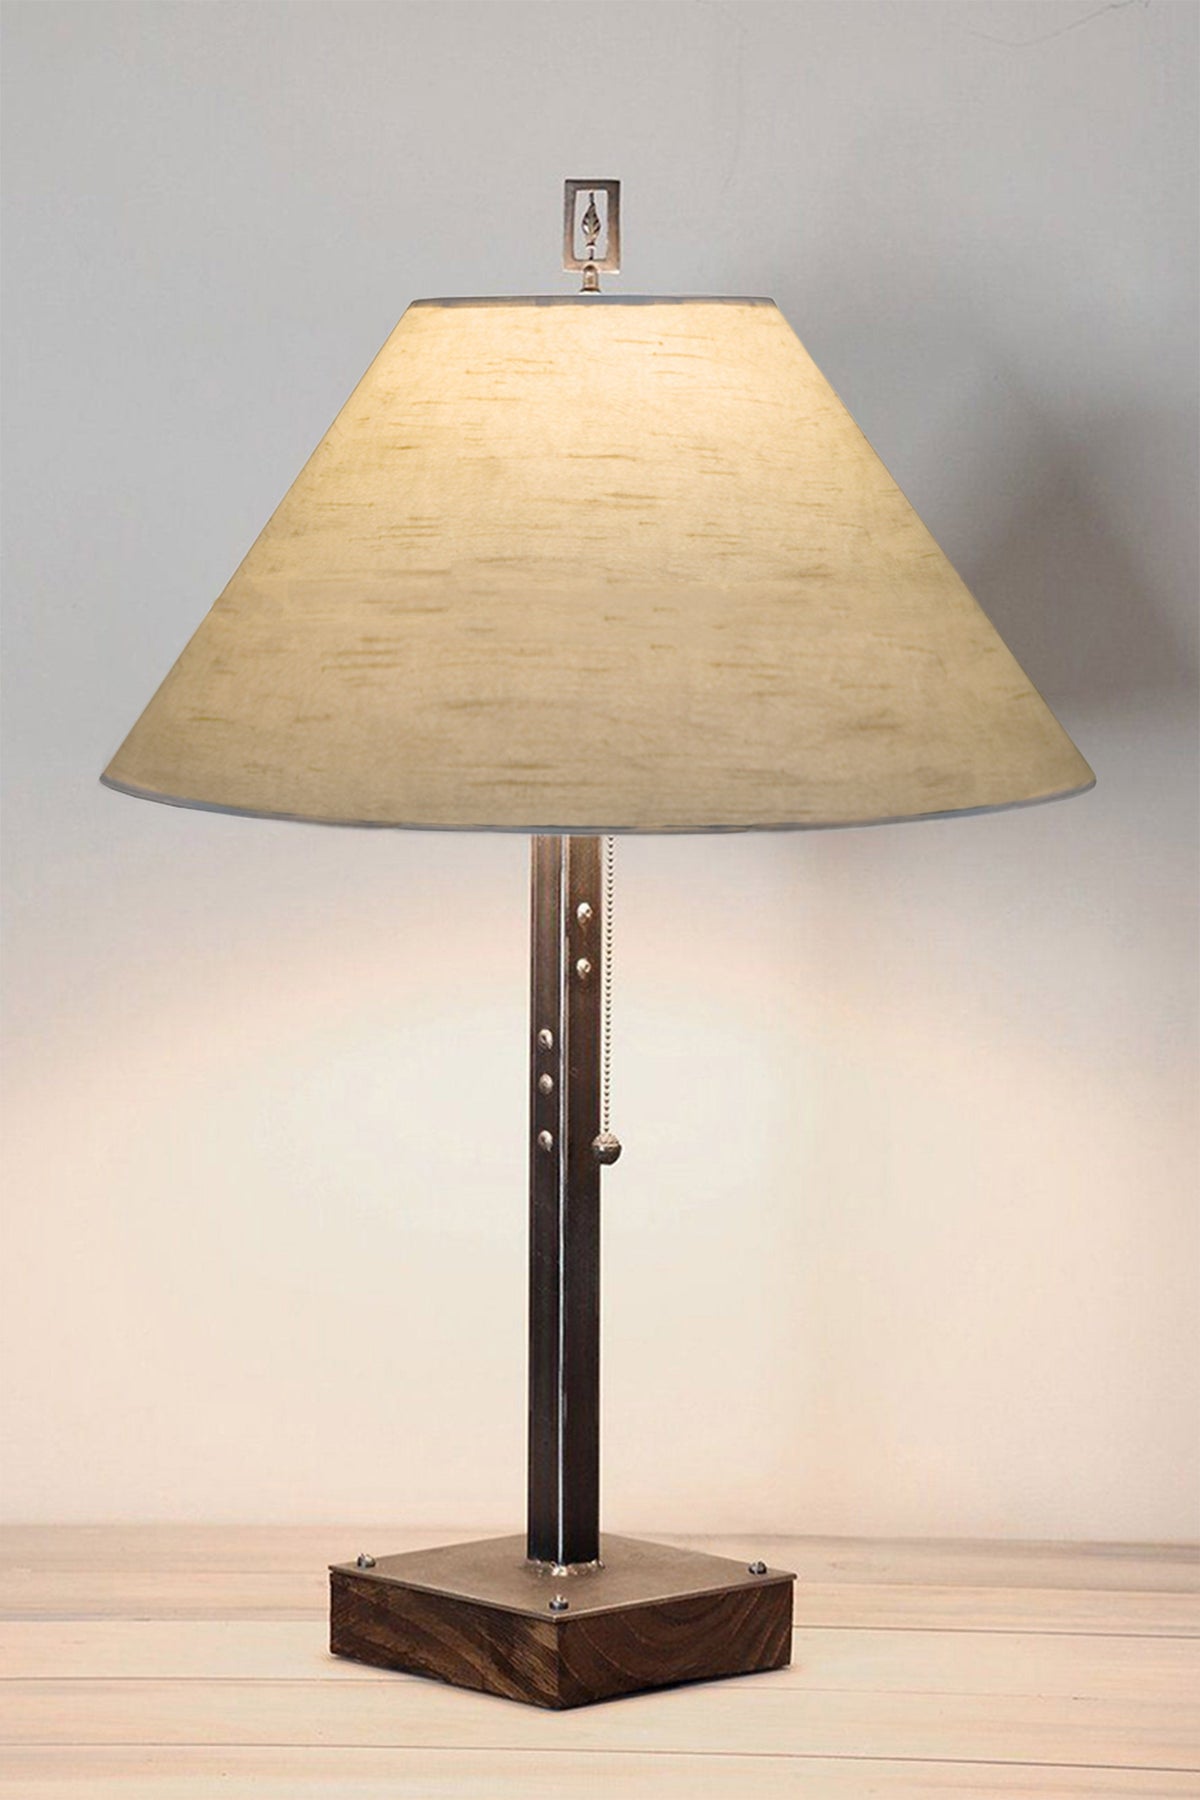 Steel Table Lamp on Wood with Large Conical Shade in Simply Birch